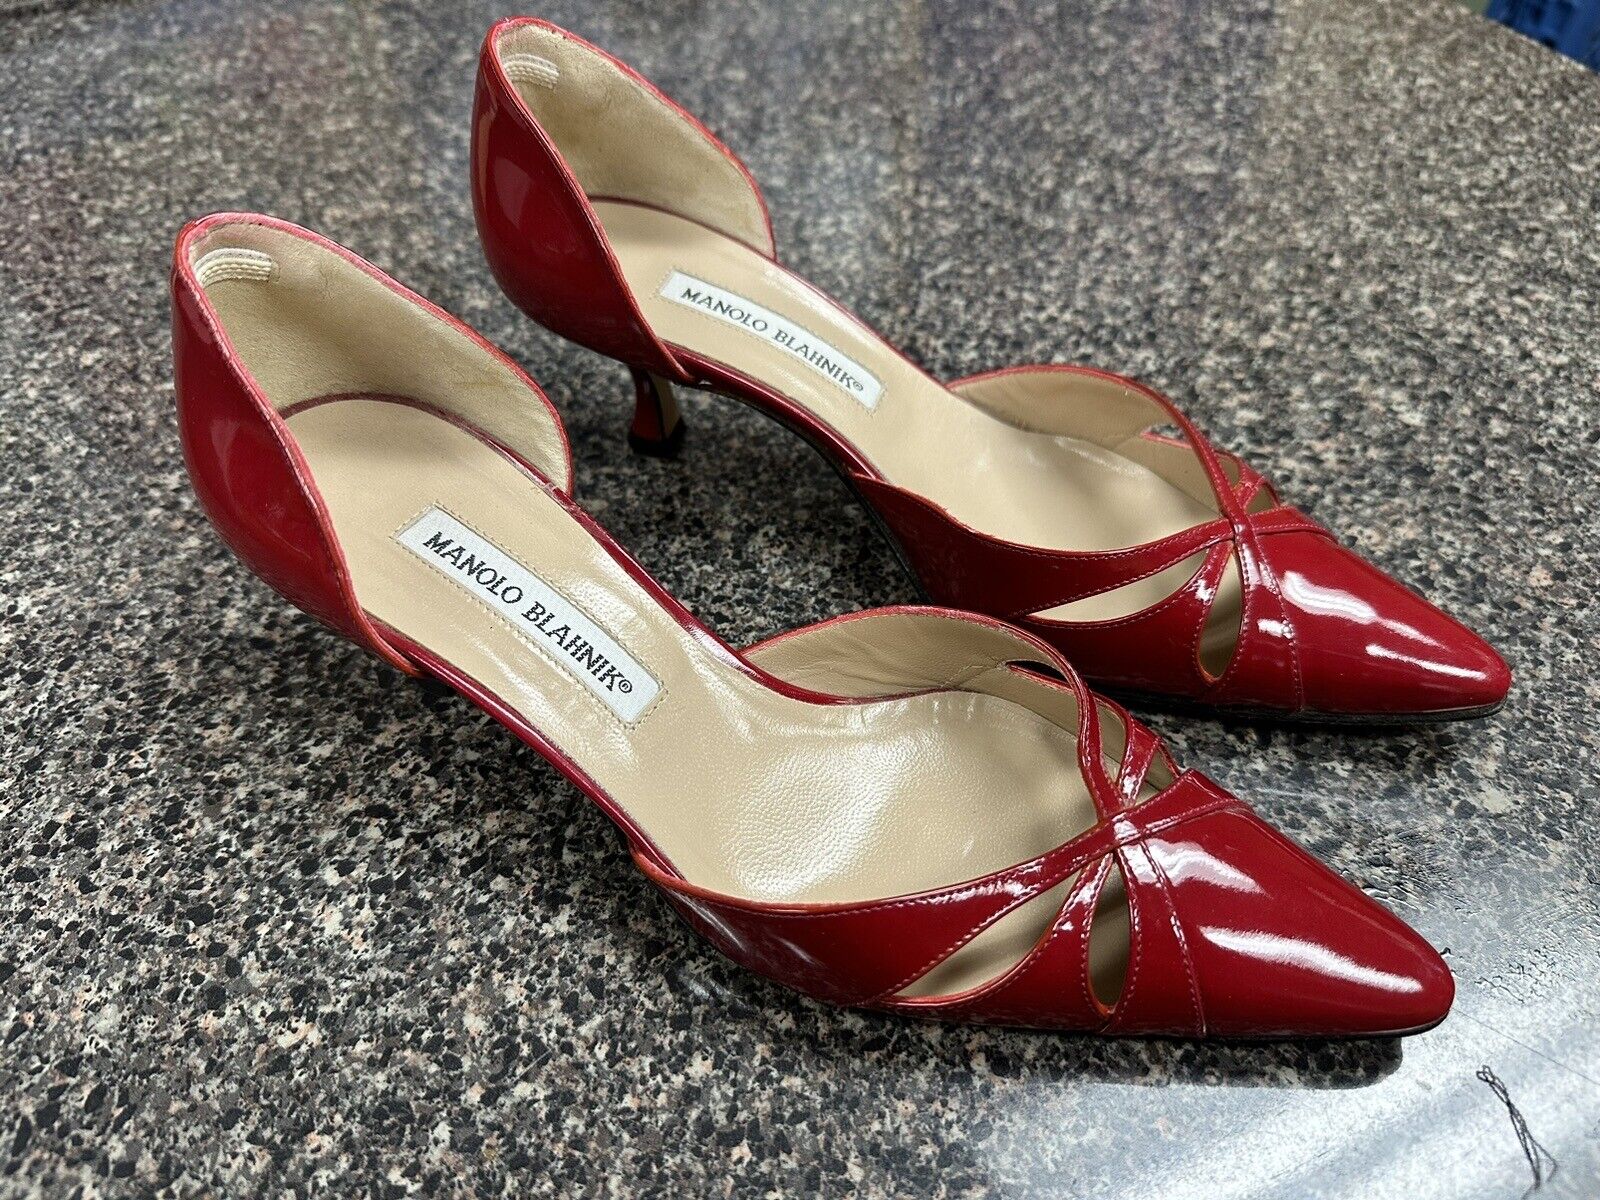 Manolo Blahnik 37 Red Patent Leather Shoes Made In Italy -3” Heels VERO CUOIO US